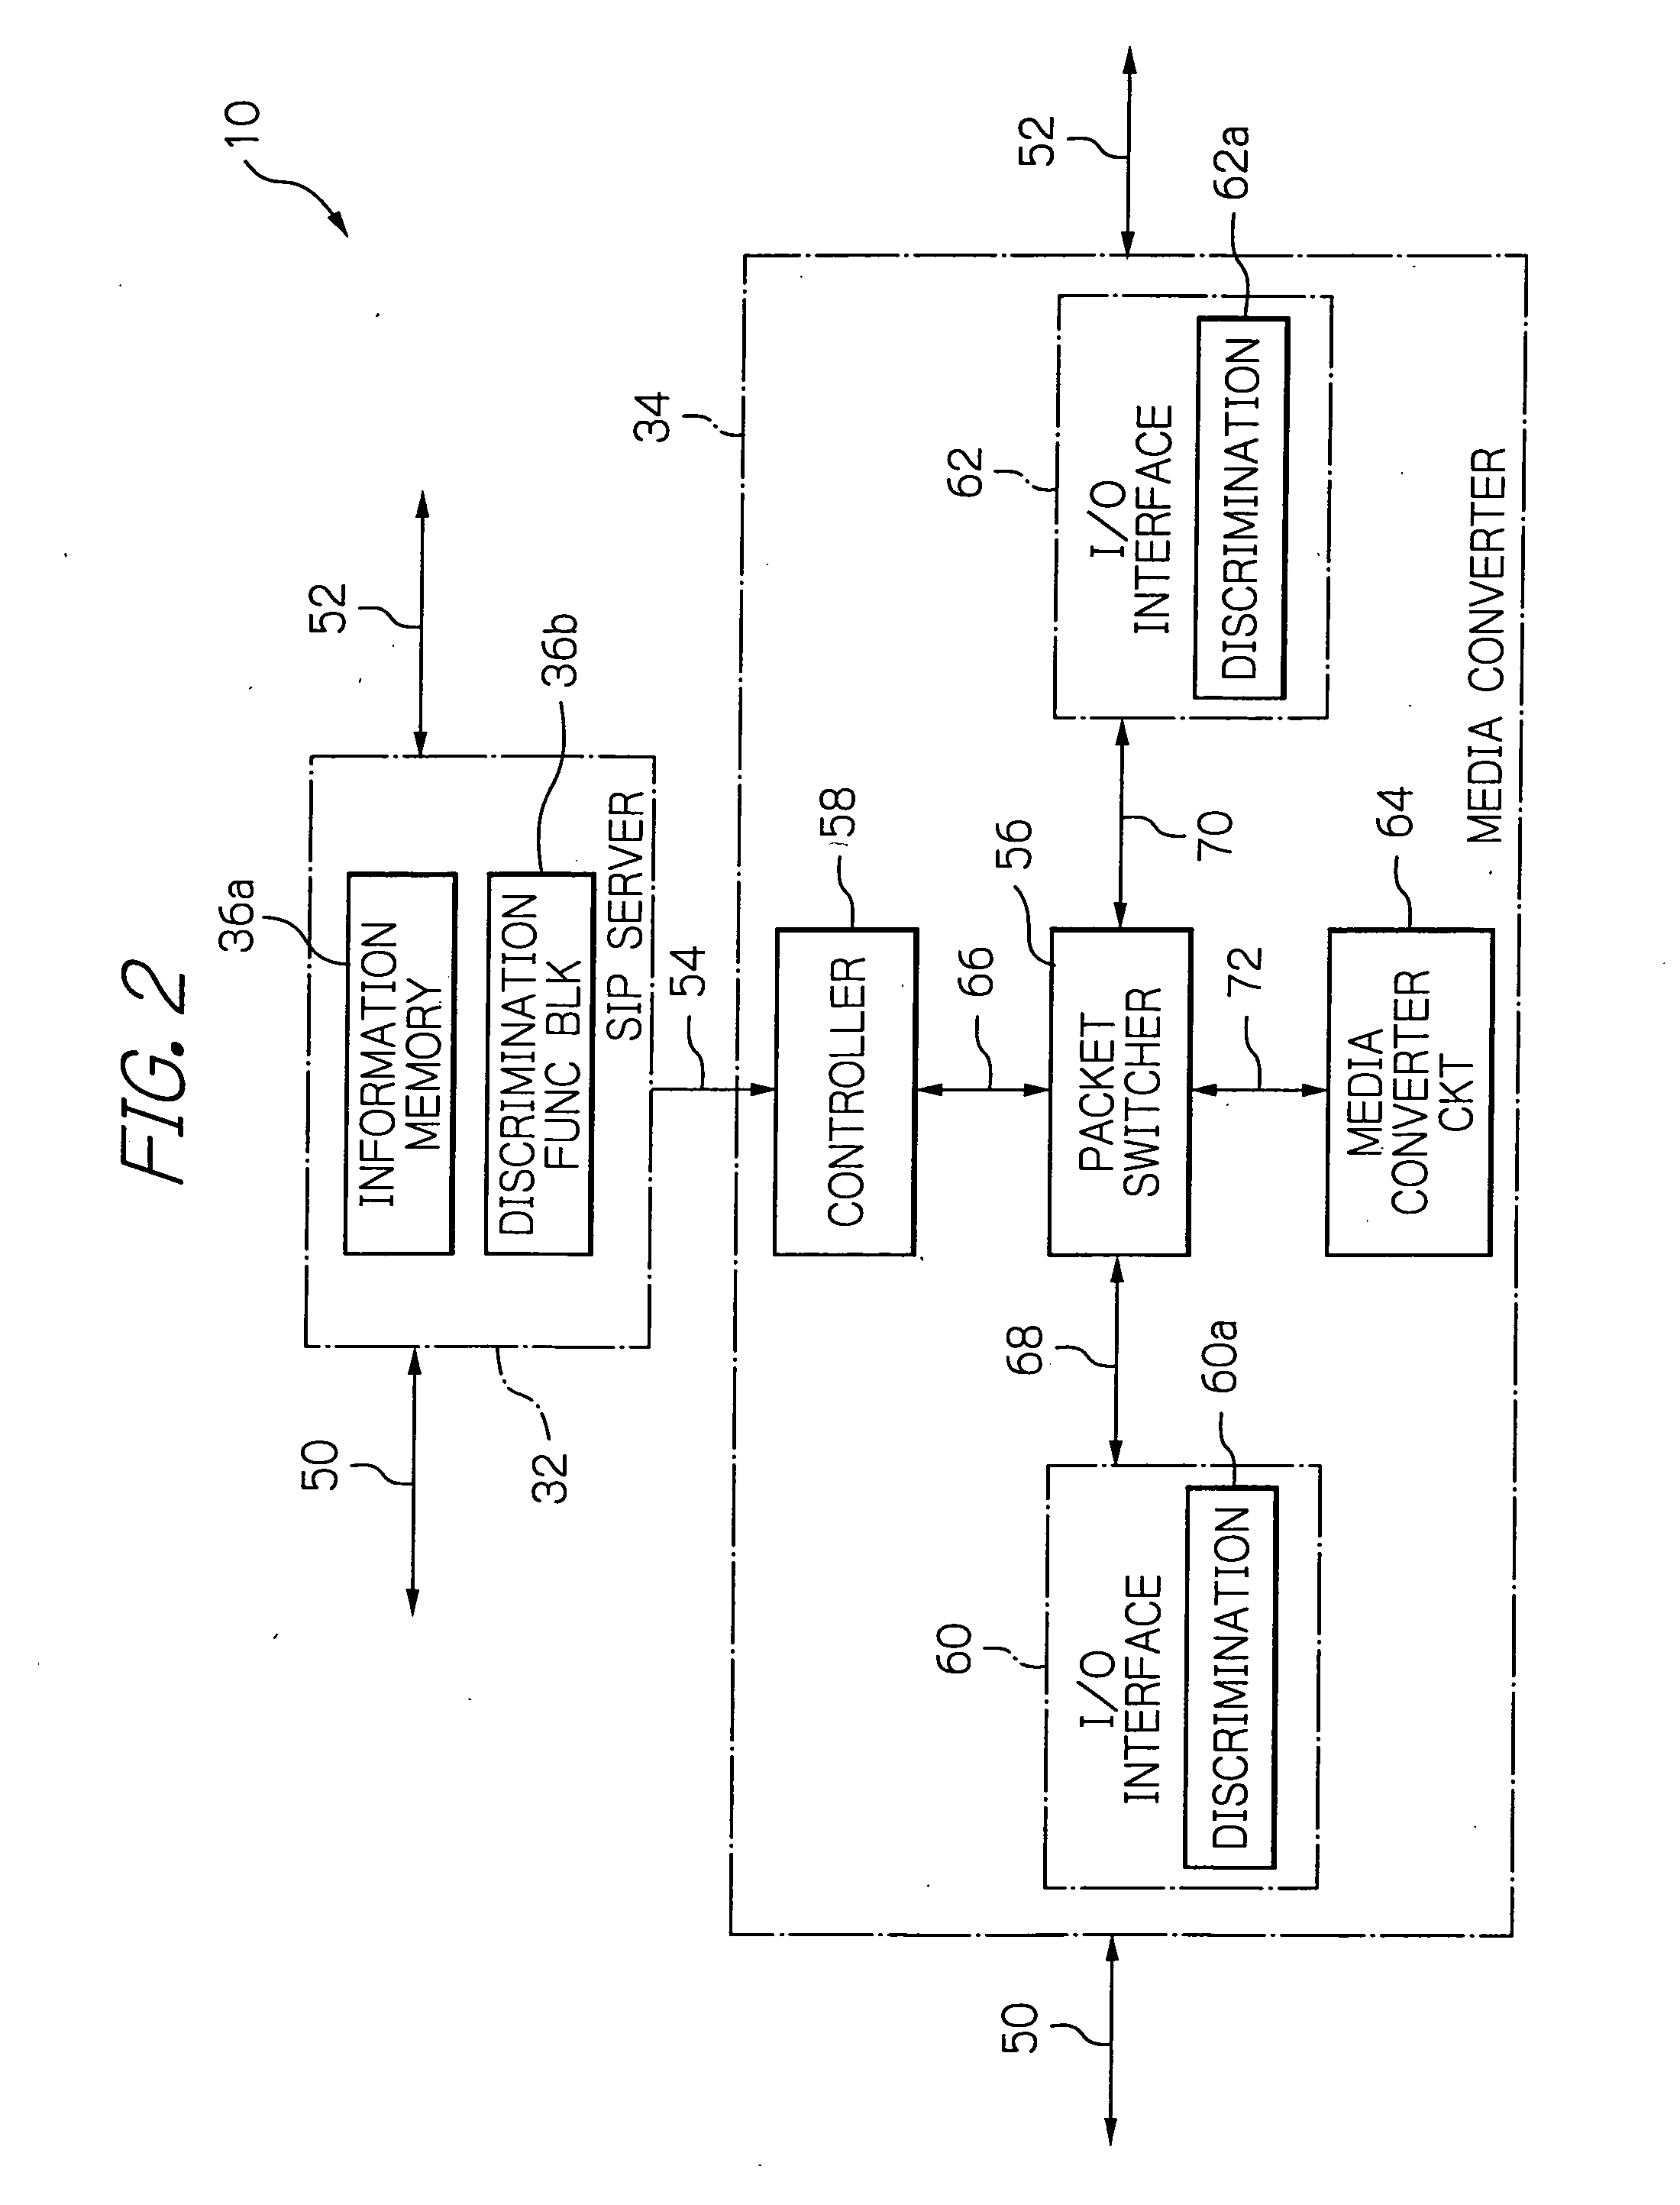 Media conversion device for interconnecting communication terminal devices with media converted and a method therefor